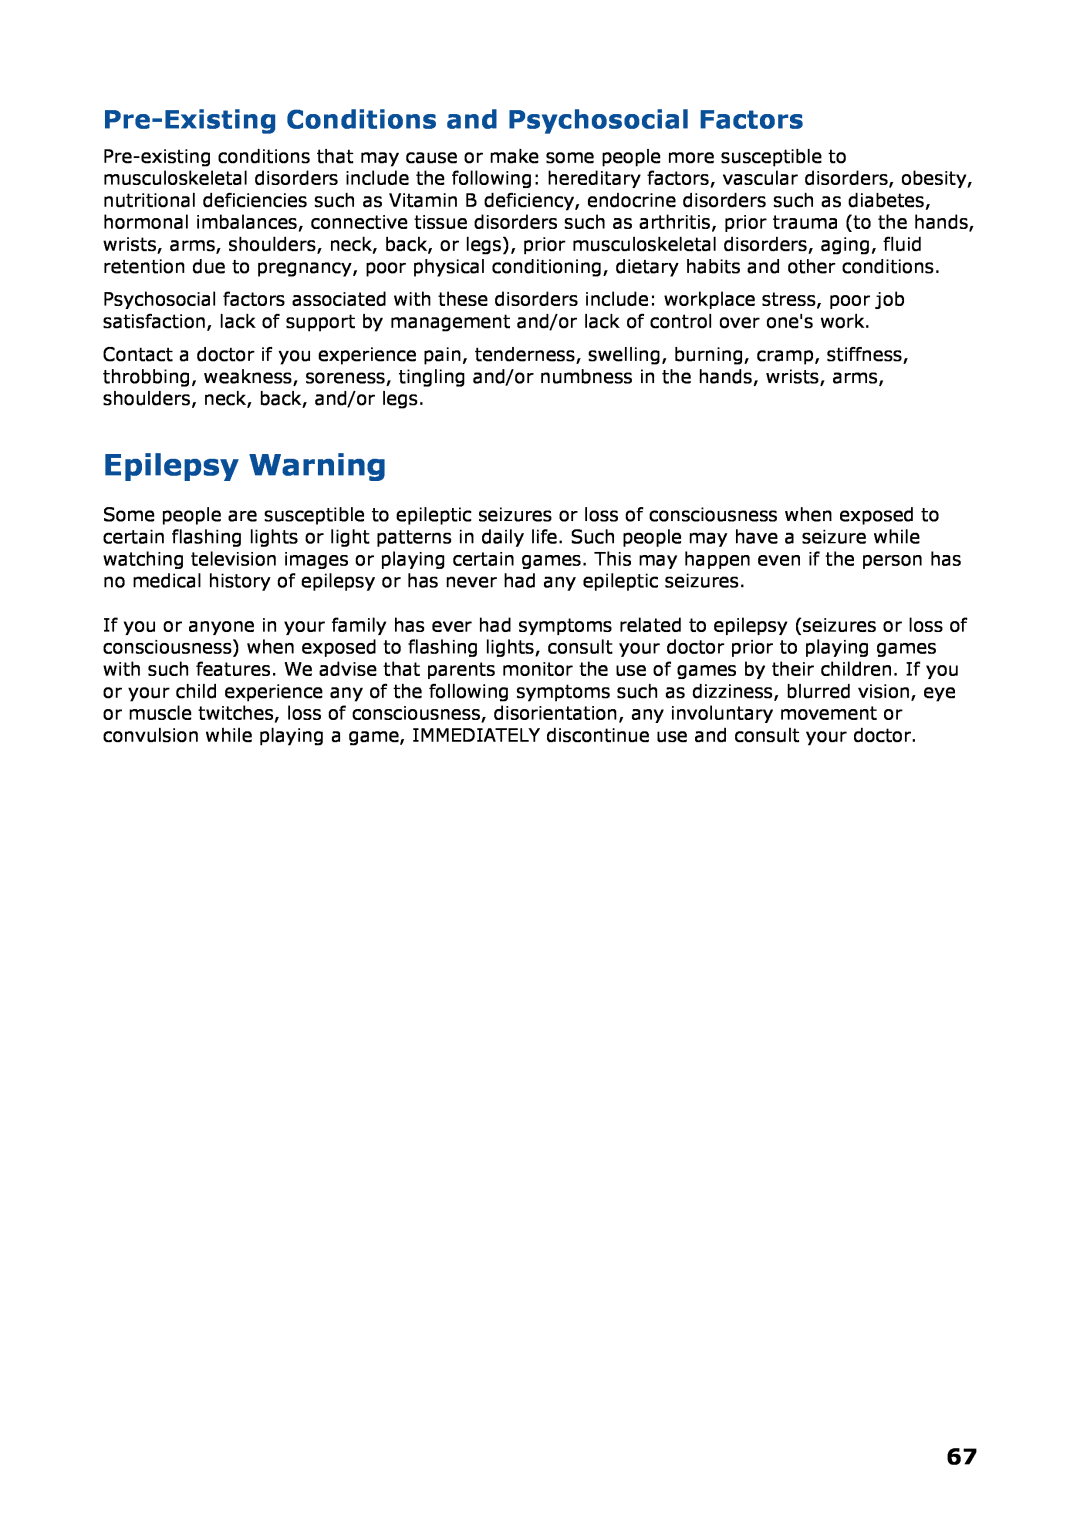 NEC P8510 manual Epilepsy Warning, Pre-Existing Conditions and Psychosocial Factors 